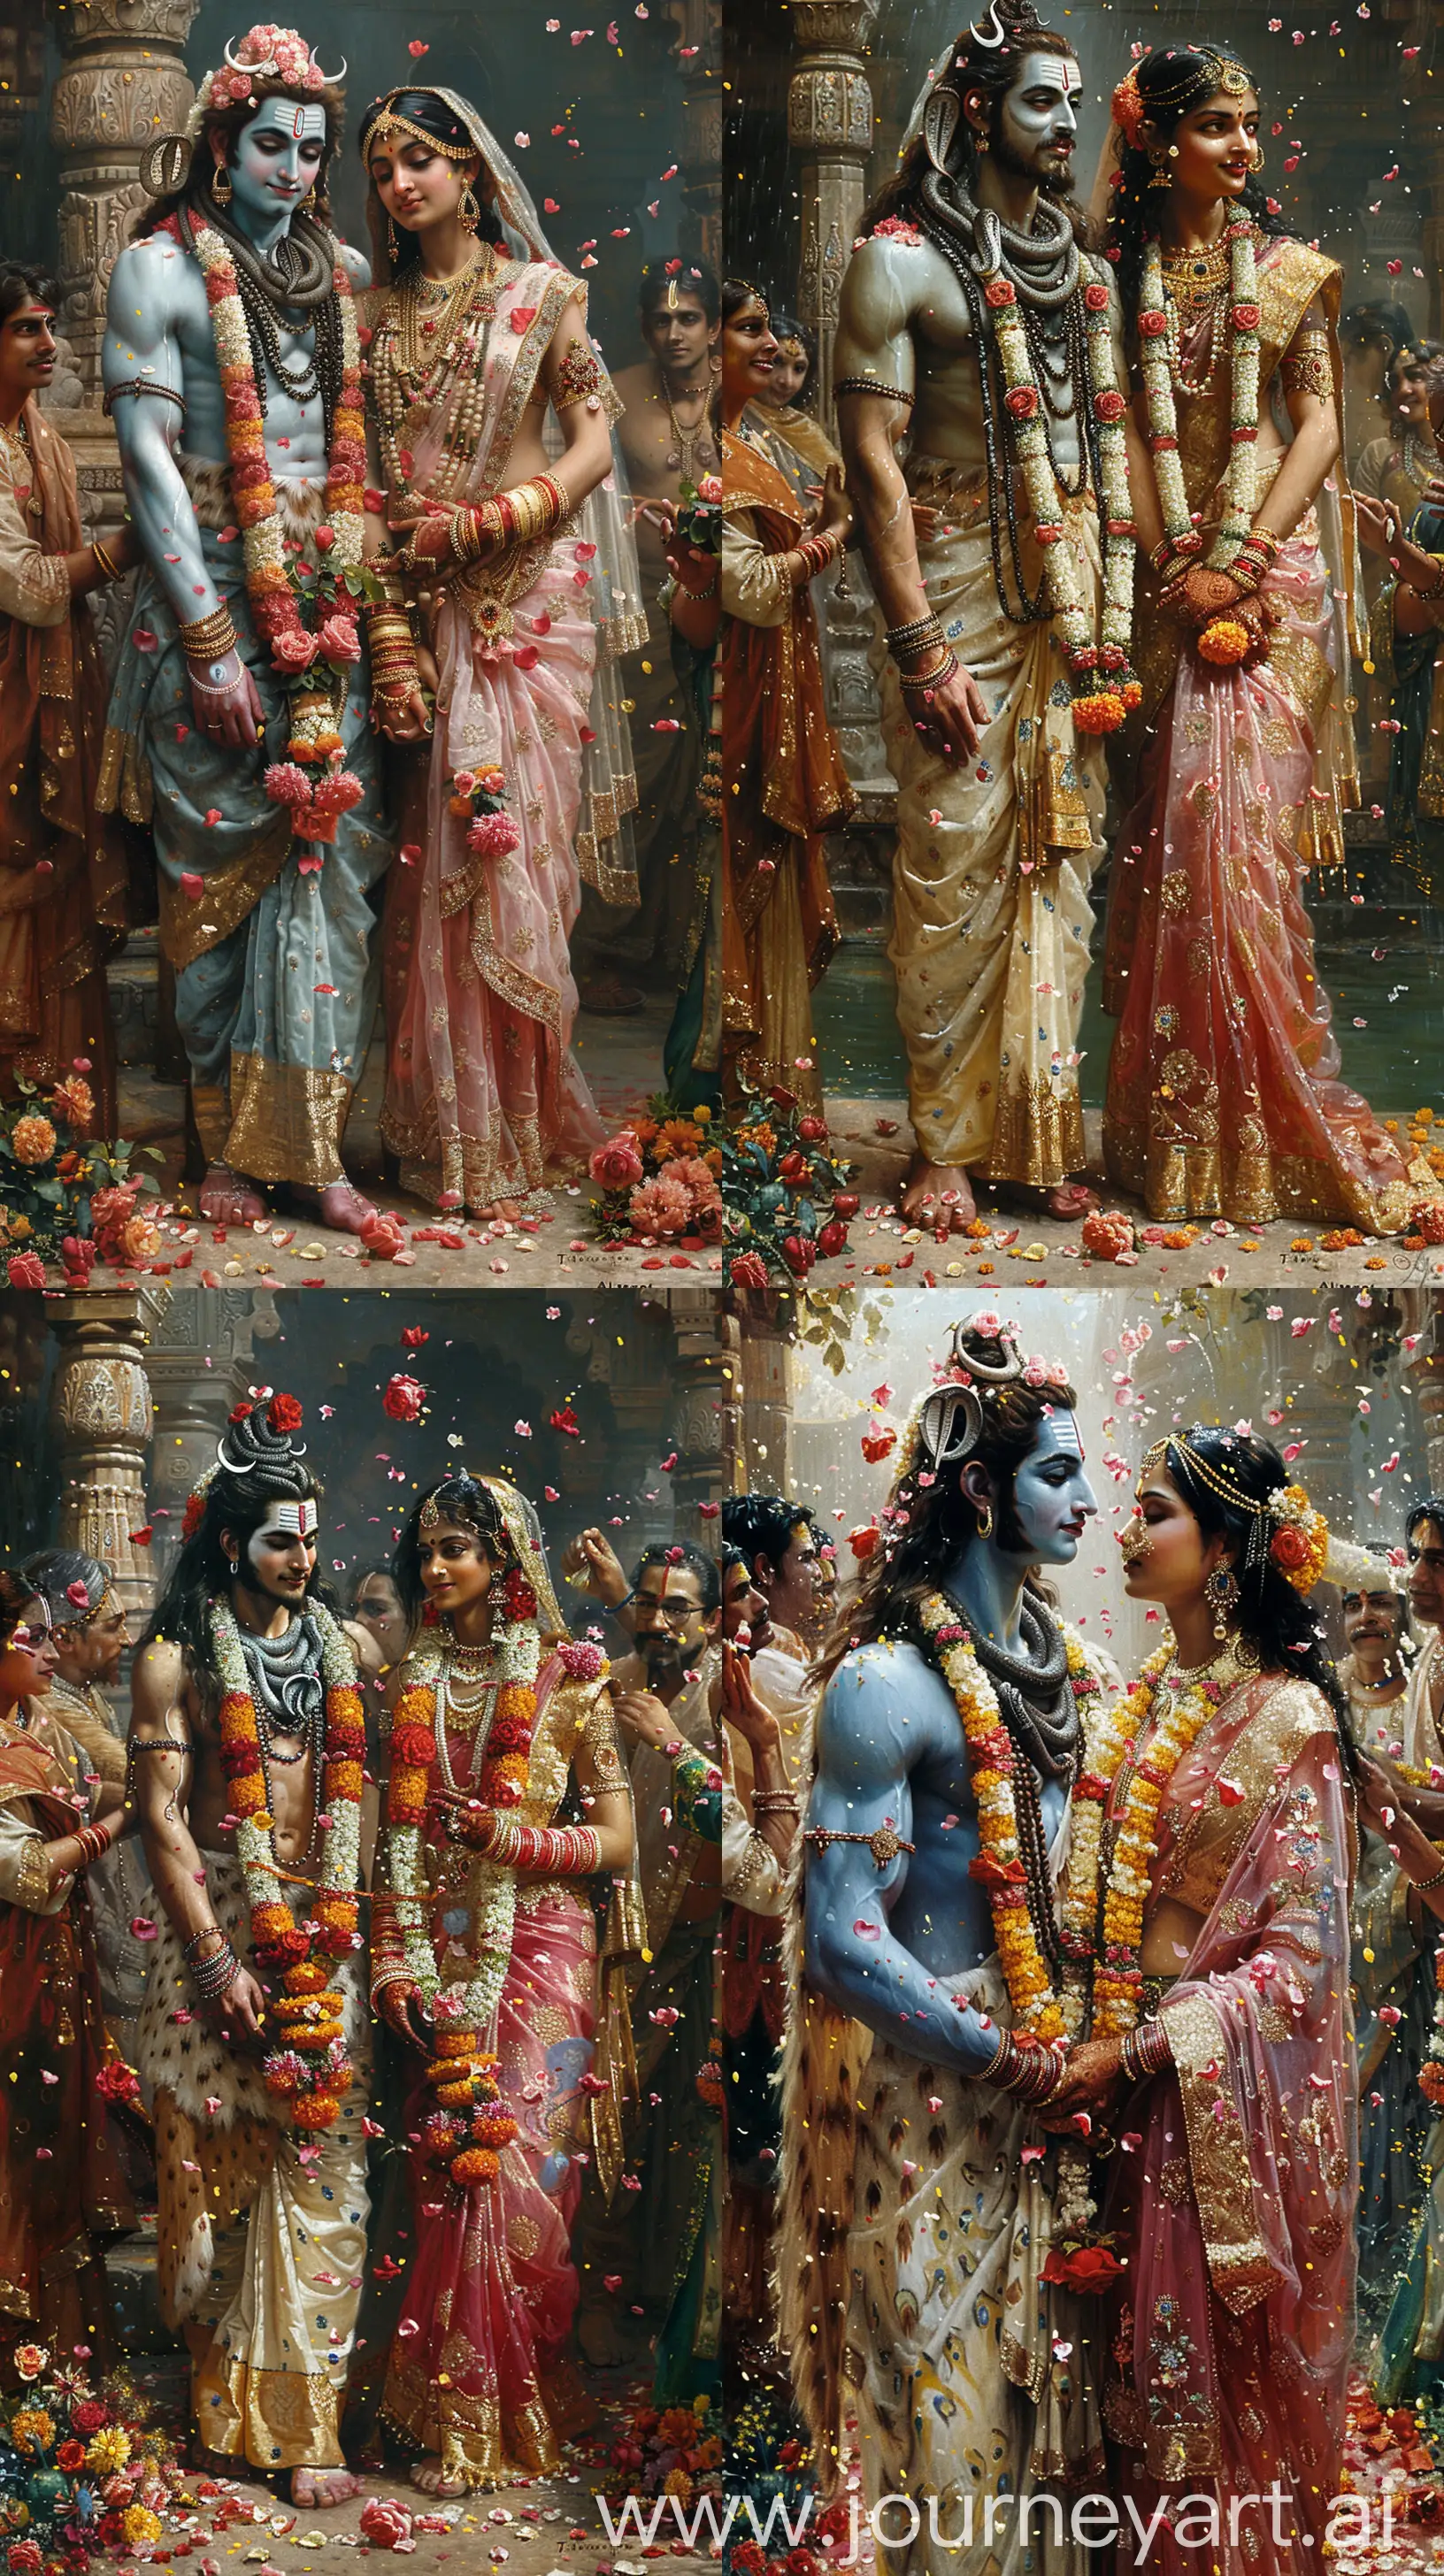 !mj1 Lavish ancient Indian wedding ceremony of Lord Shiva and Goddess Parvati, grand Shivratri festival, intricate traditional attire, onlookers showering roses and marigolds, festive atmosphere, vivid colors, detailed mural painting style, reminiscent of Ajanta cave frescoes --ar 9:16 --s 750 --v 6